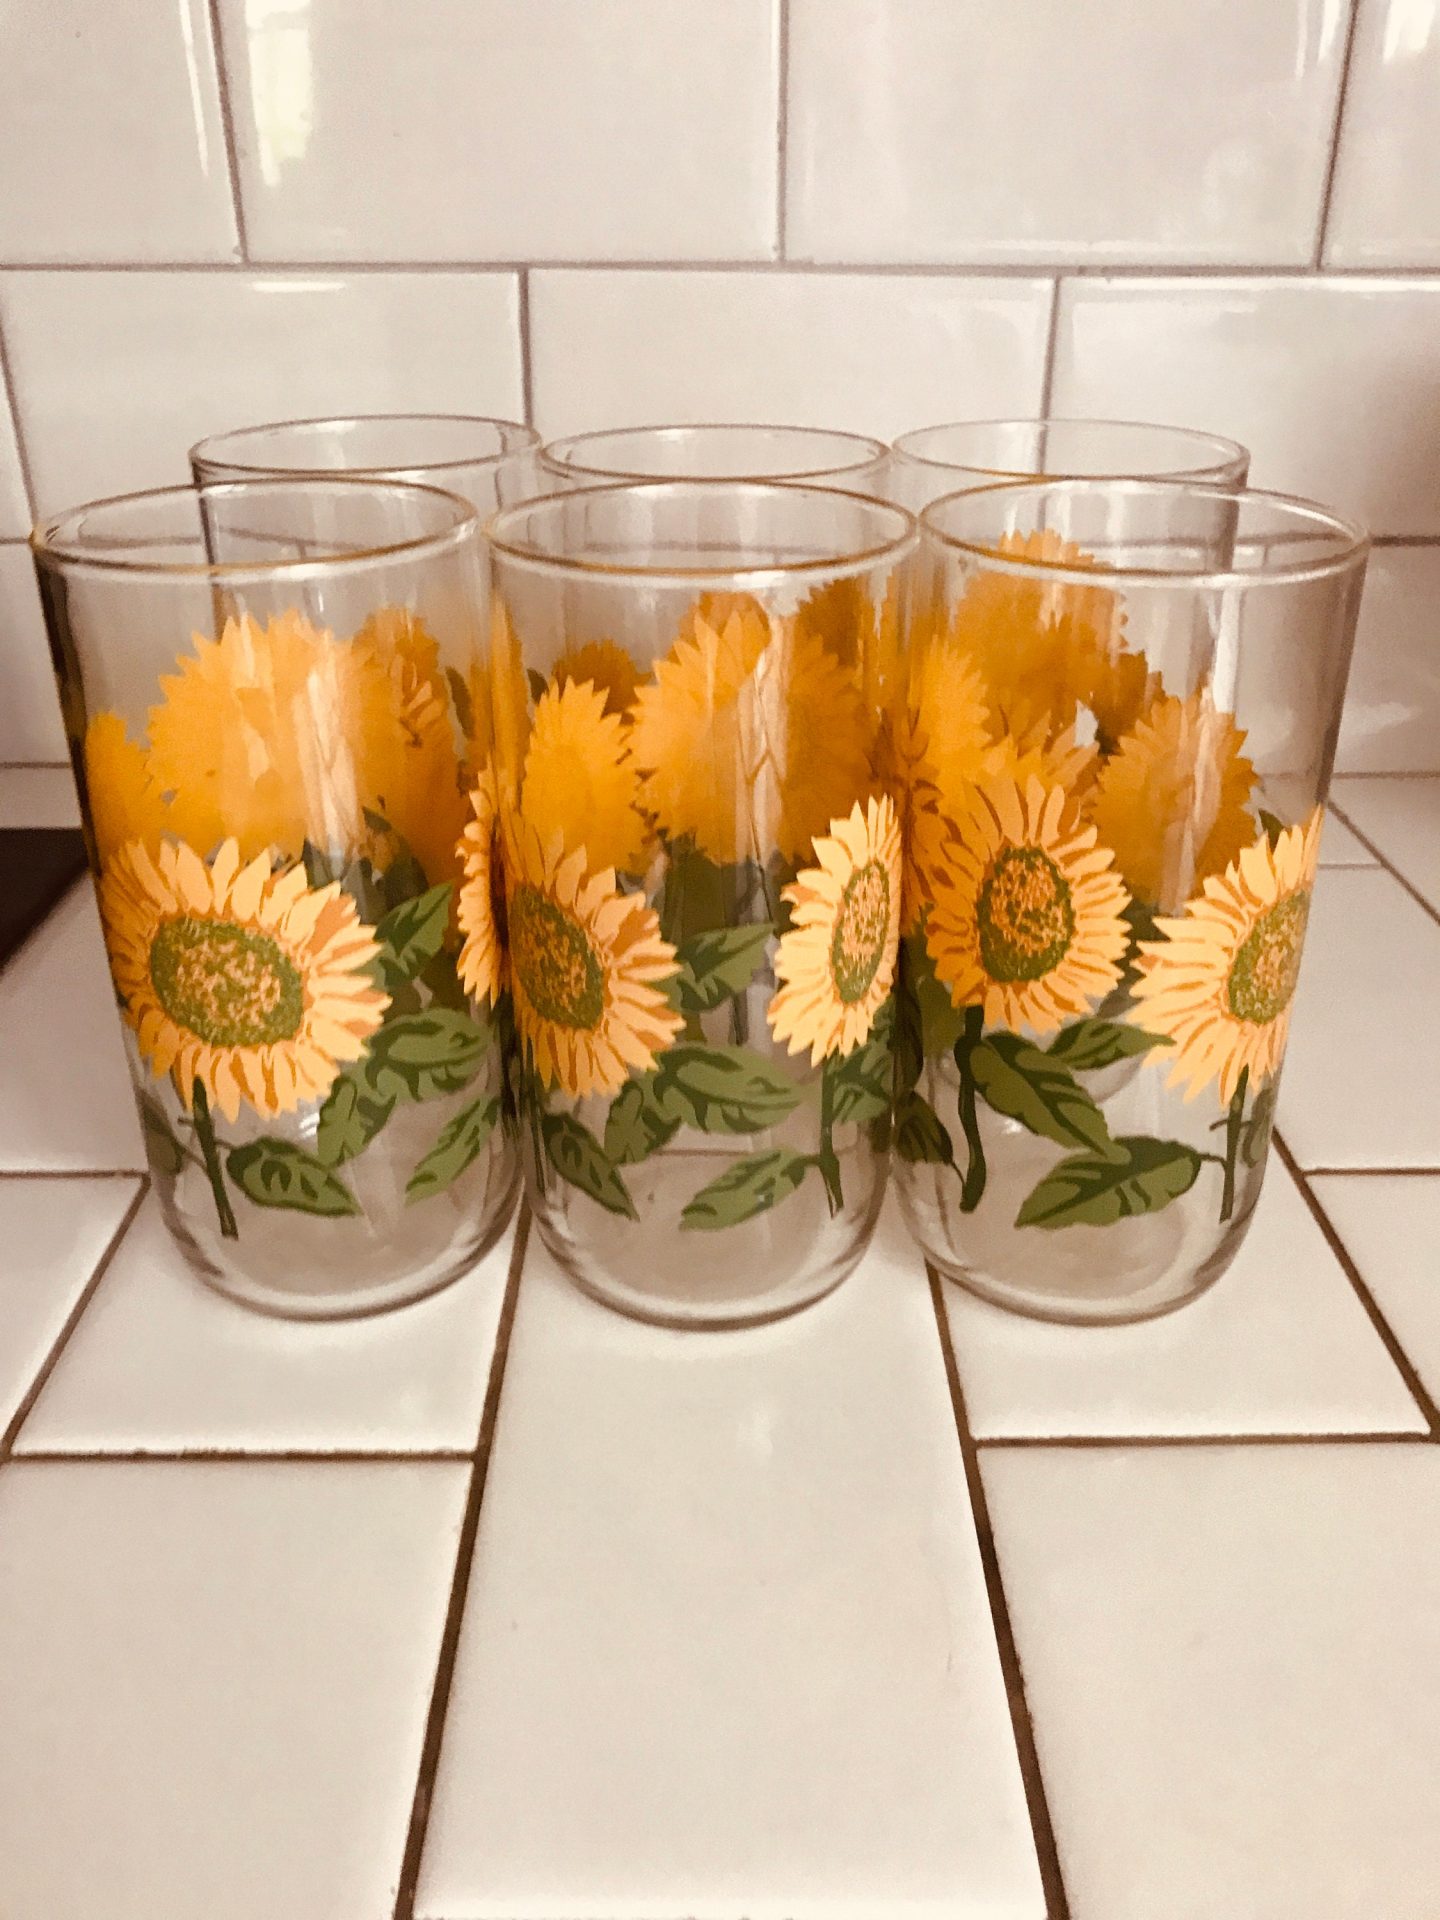 https://www.truevintageantiques.com/wp-content/uploads/2022/05/vintage-sunflower-glasses-tumblers-libby-with-large-yellow-sunflowers-collectible-display-home-decor-kitchen-drinkware-6291704c1-scaled.jpg